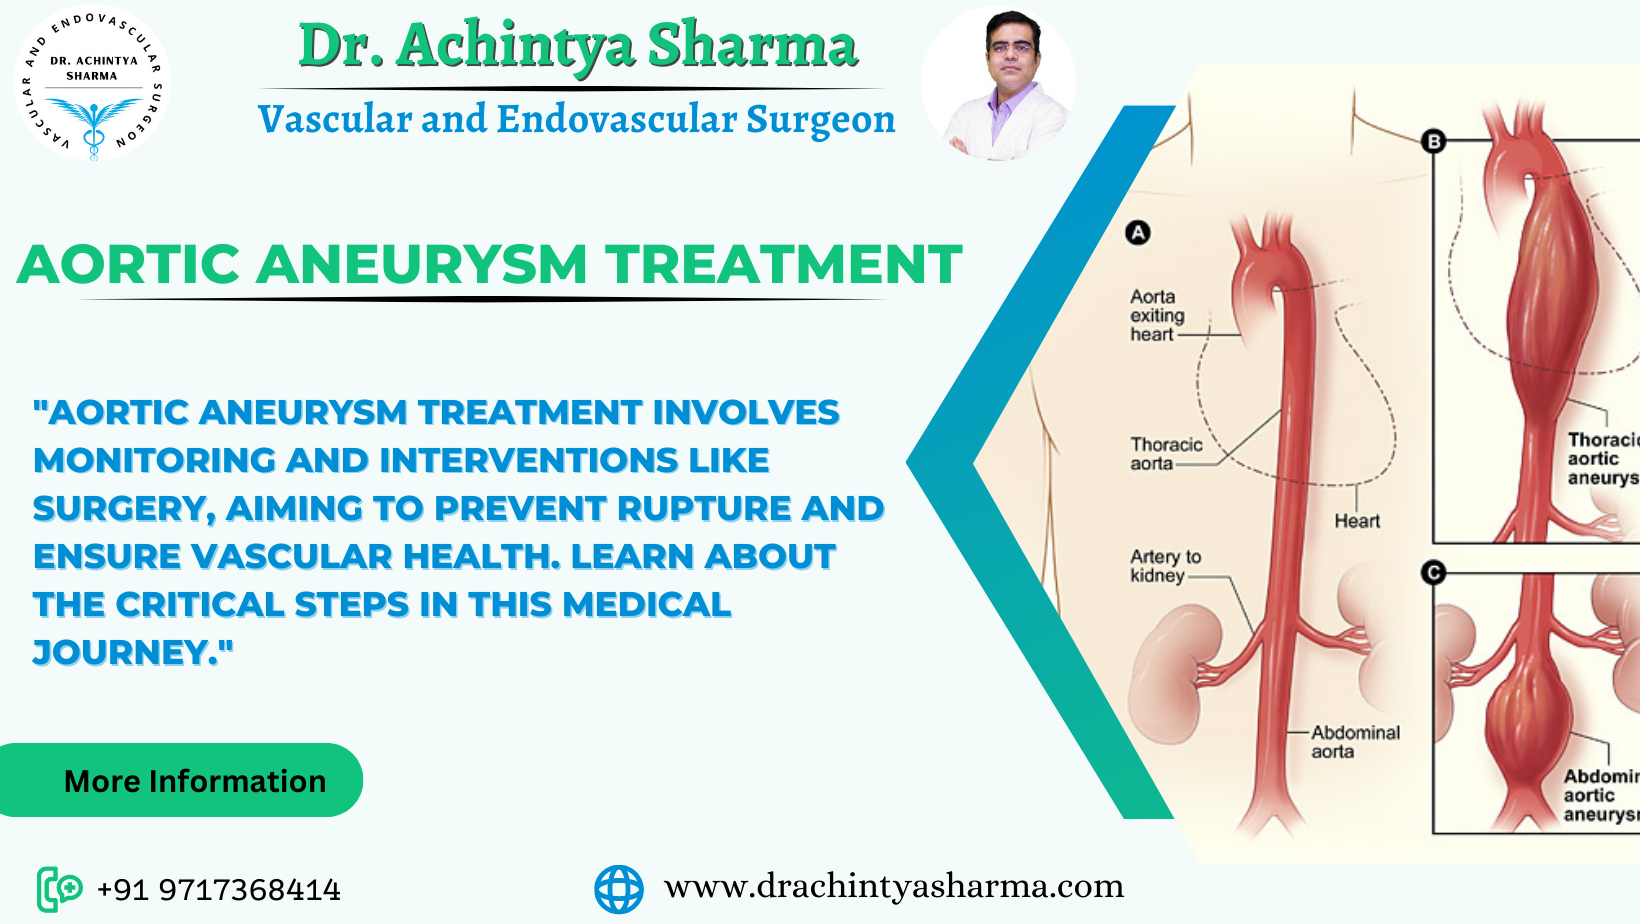 Overview of Aortic Aneurysm treatment